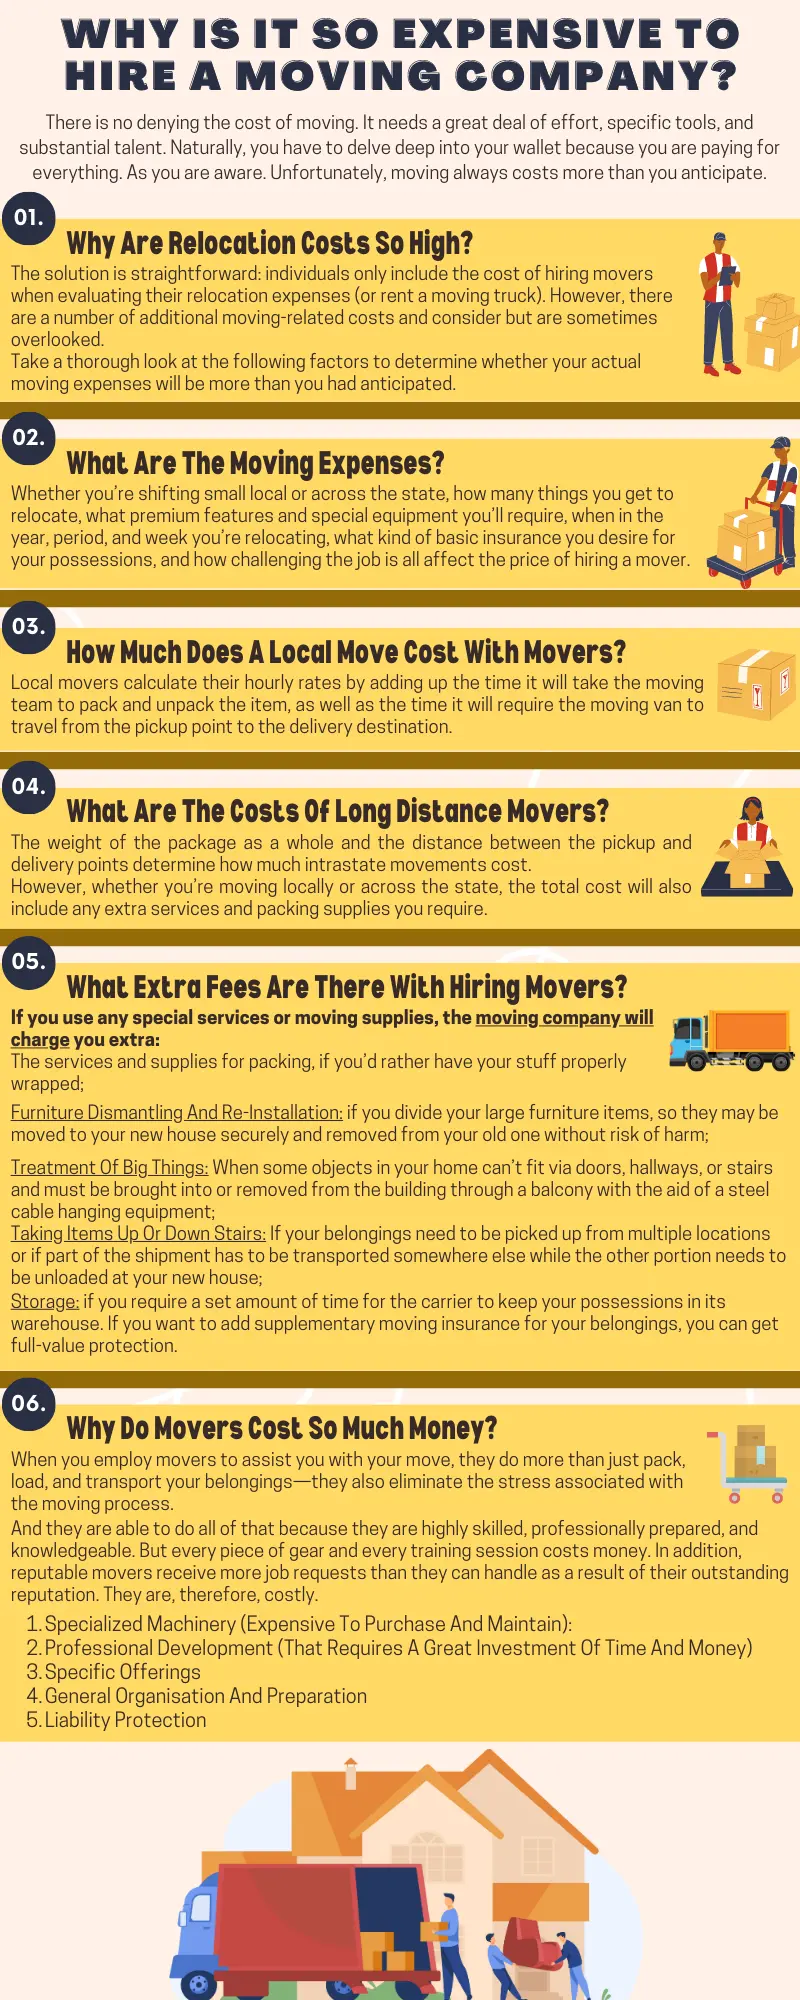 Why Is It So Expensive To Hire A Moving Company Informational Infographic